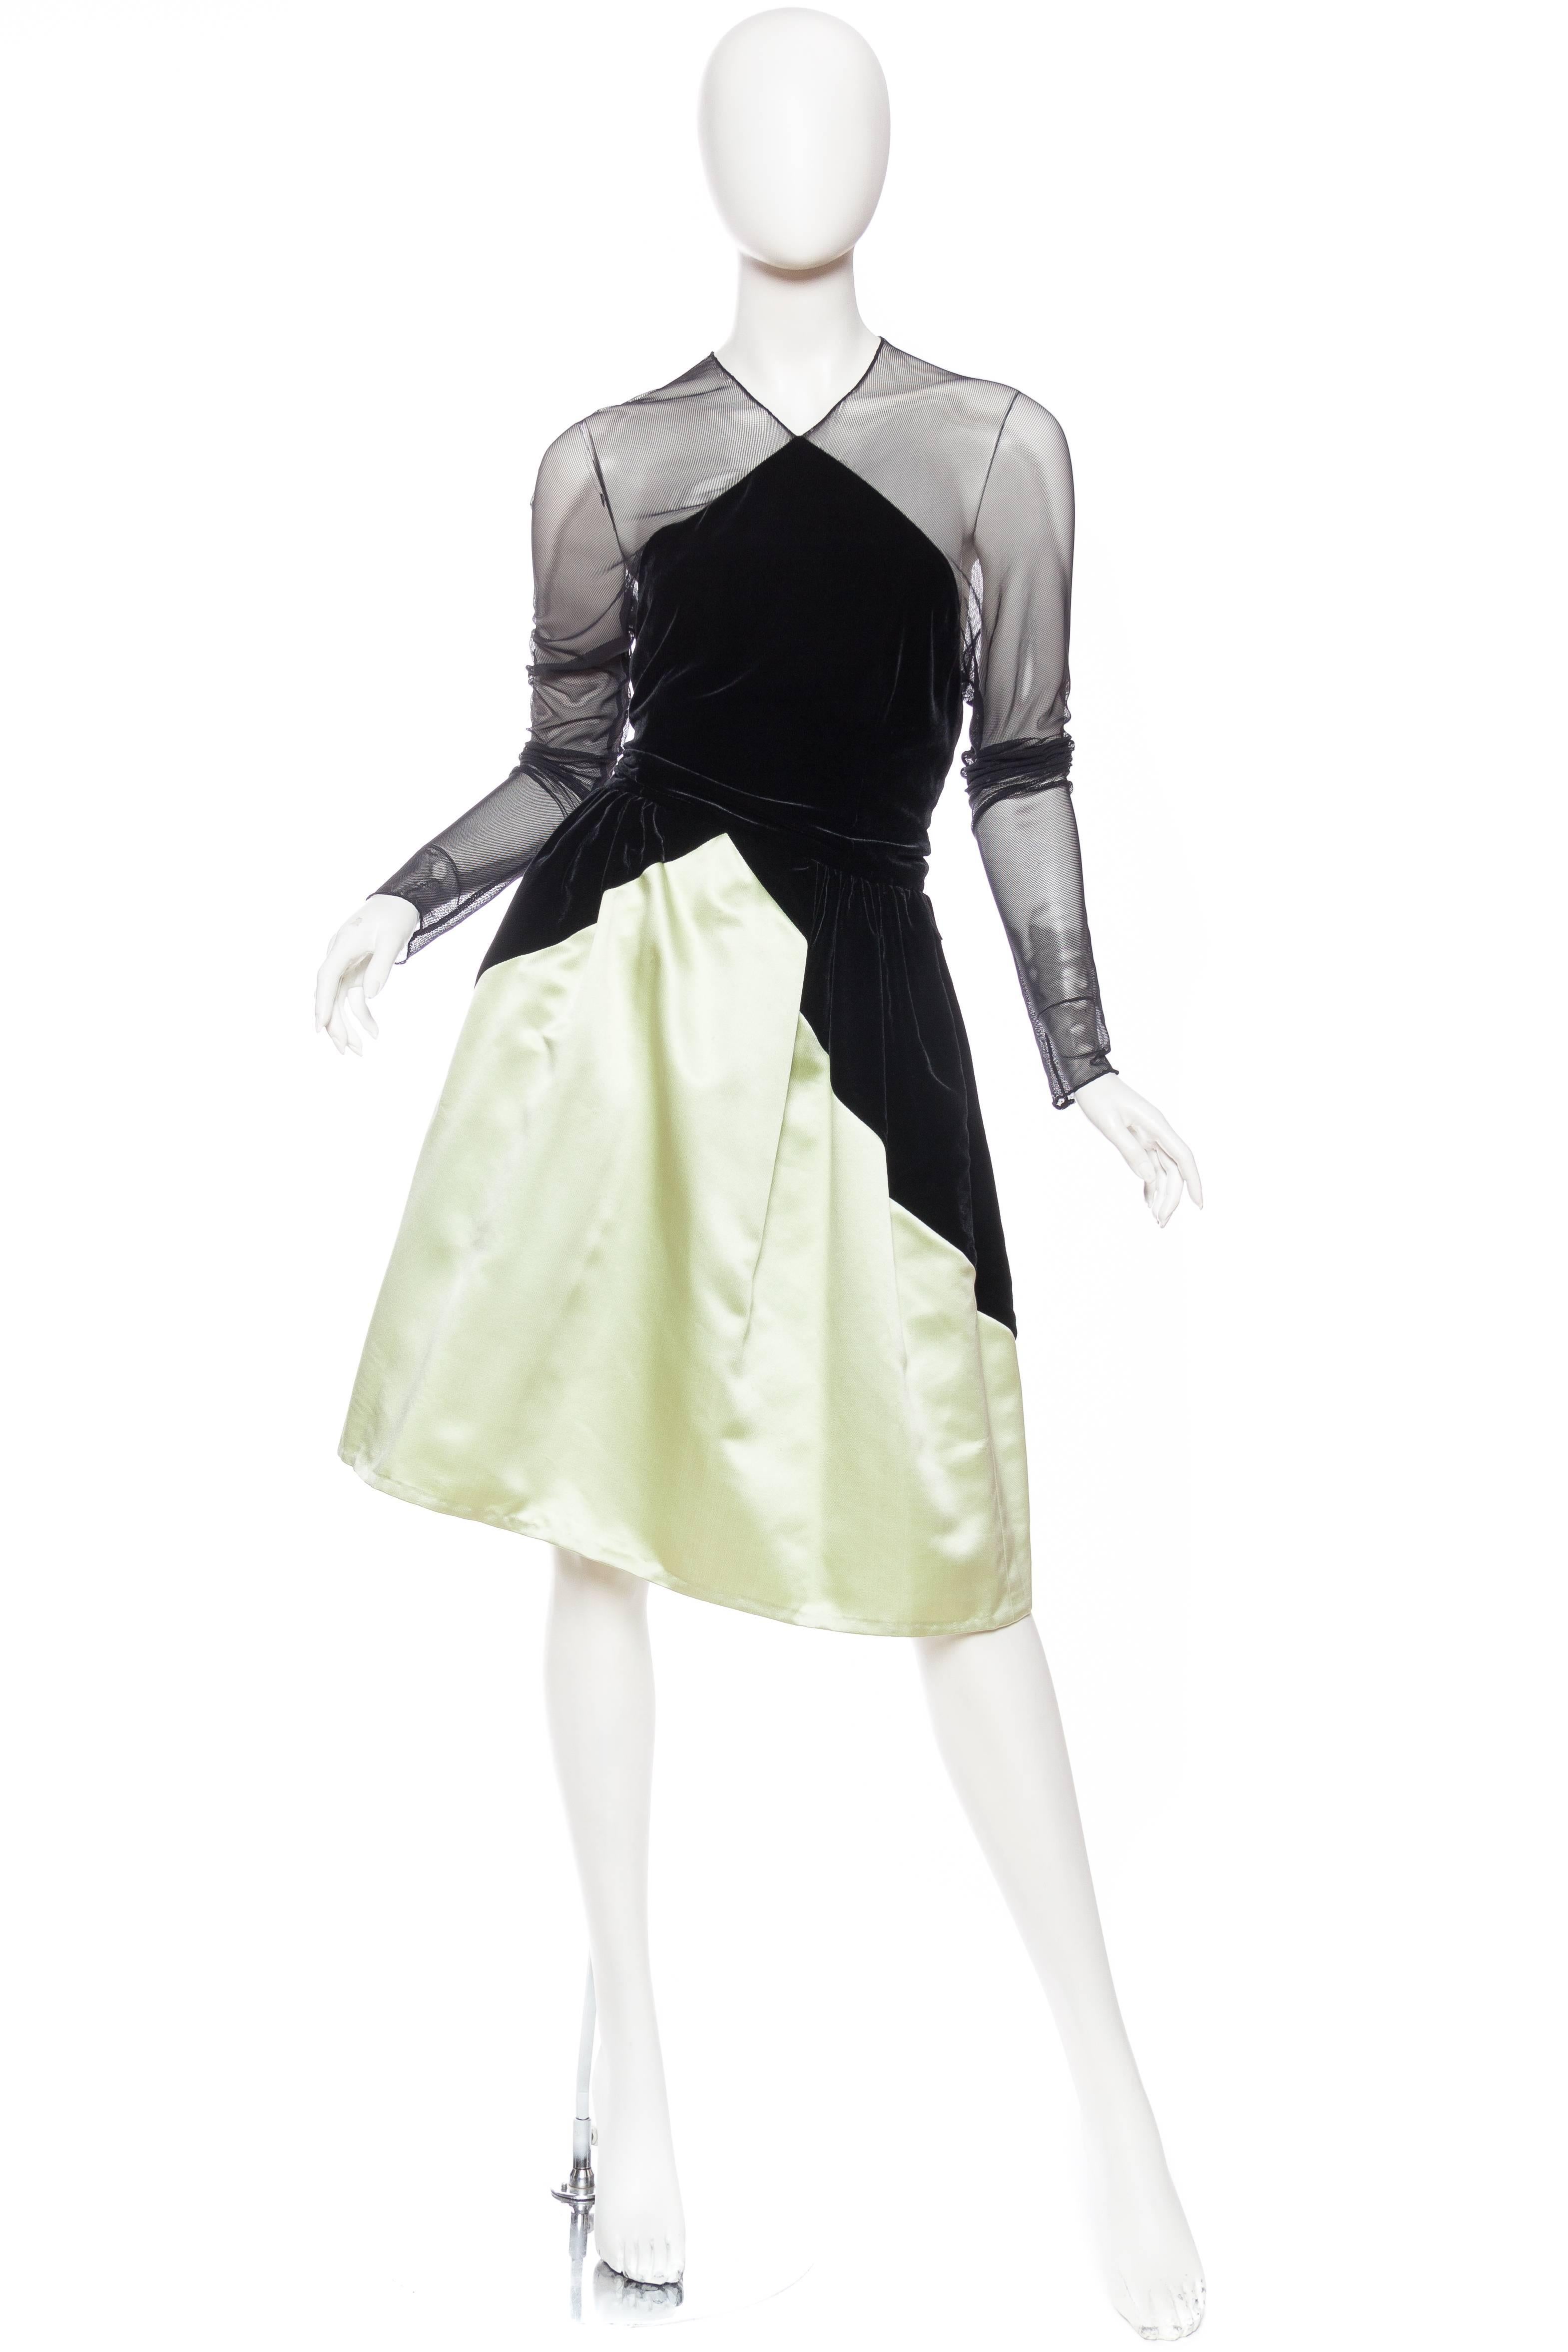 We were surprised to see the Bill Blass label in this dress. The lines and mix of textiles are just so Geoffrey Beene he must have been influenced by him in the 1990s, that or Charles James's work from the 1950s. Reguardless this is a modern, chic